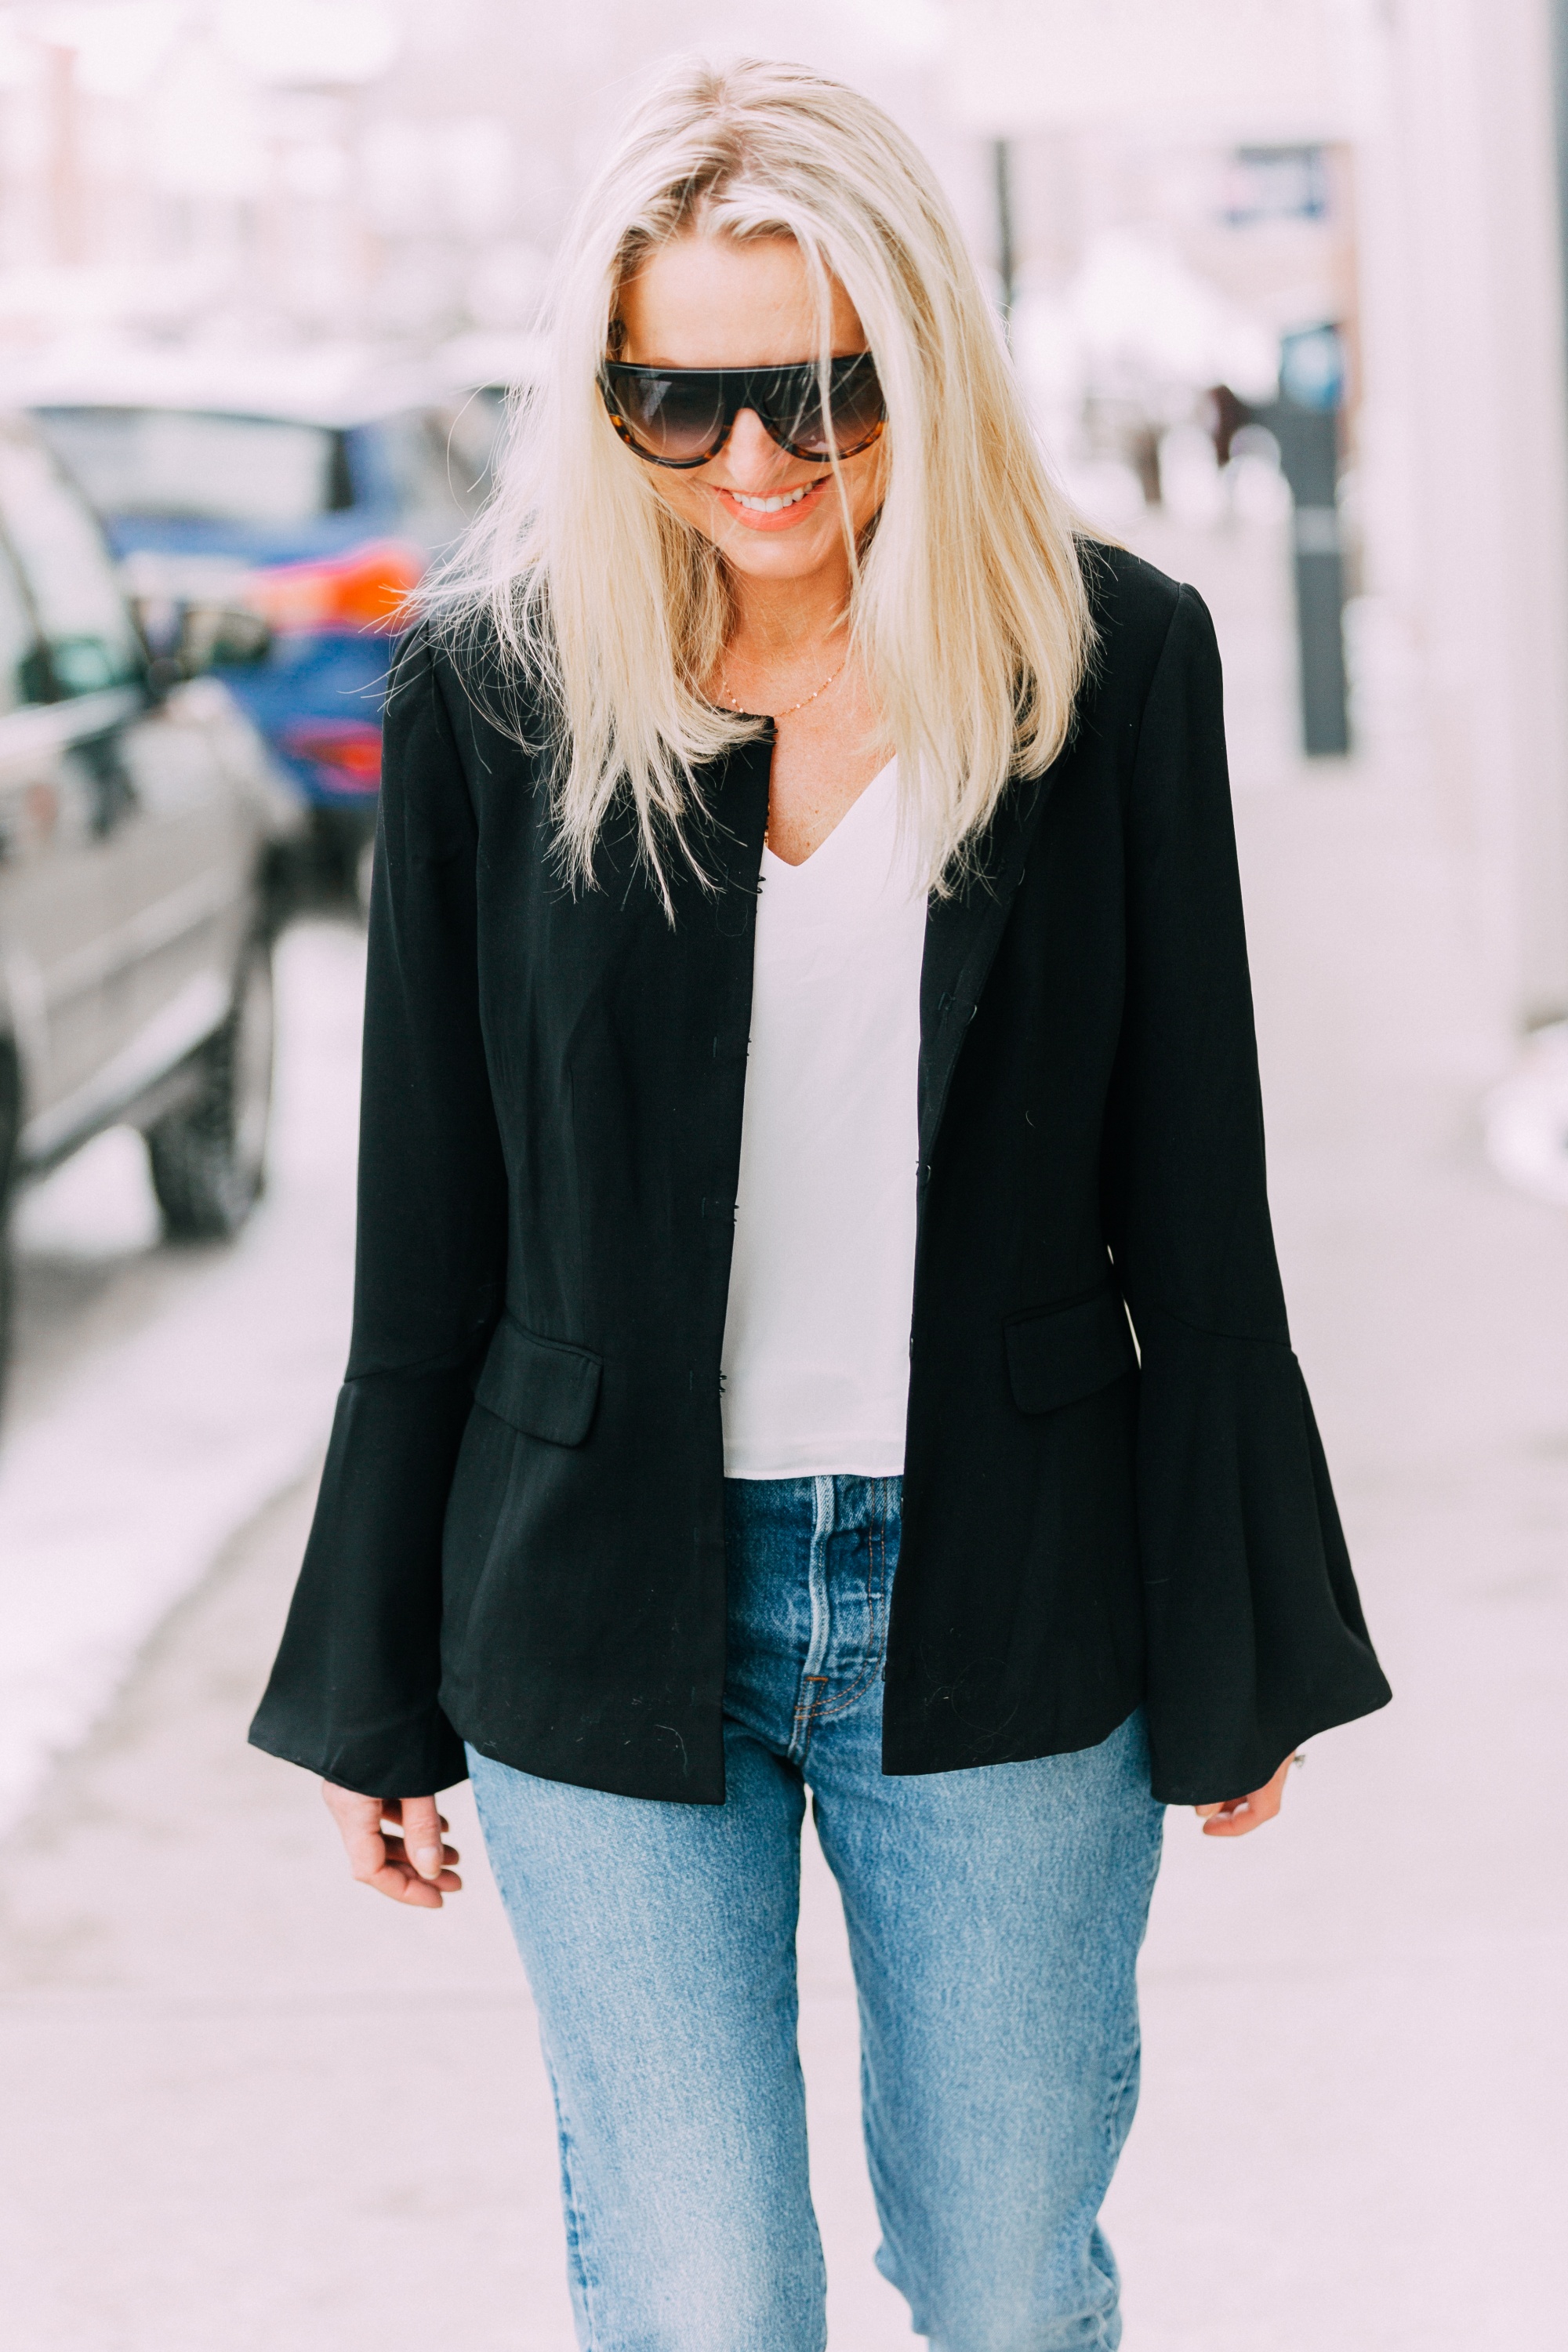 Spring Fashion, Le Gali black flare sleeve jacket, Levi jeans, AQUA tank, and Via Spiga white mules from Bloomingdale's worn by fashion blogger Erin Busbee of BusbeeStyle.com in Telluride, CO